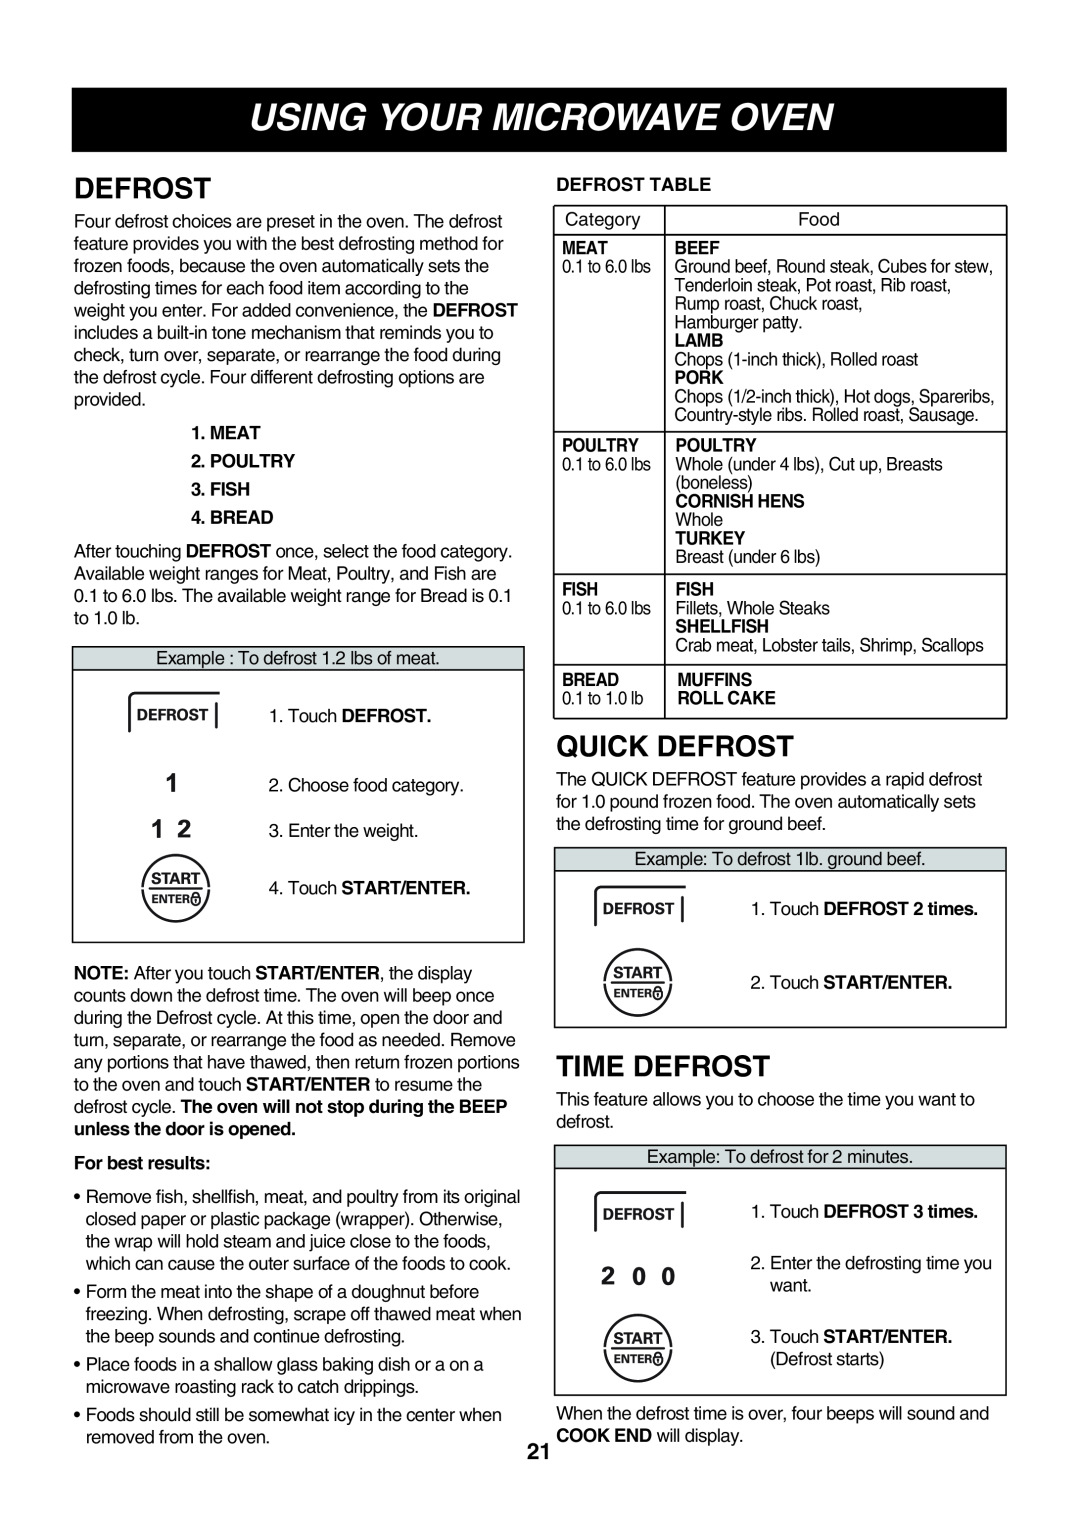 Minolta LMVM2085SB owner manual Quick Defrost, Time Defrost, Using Your Microwave Oven 